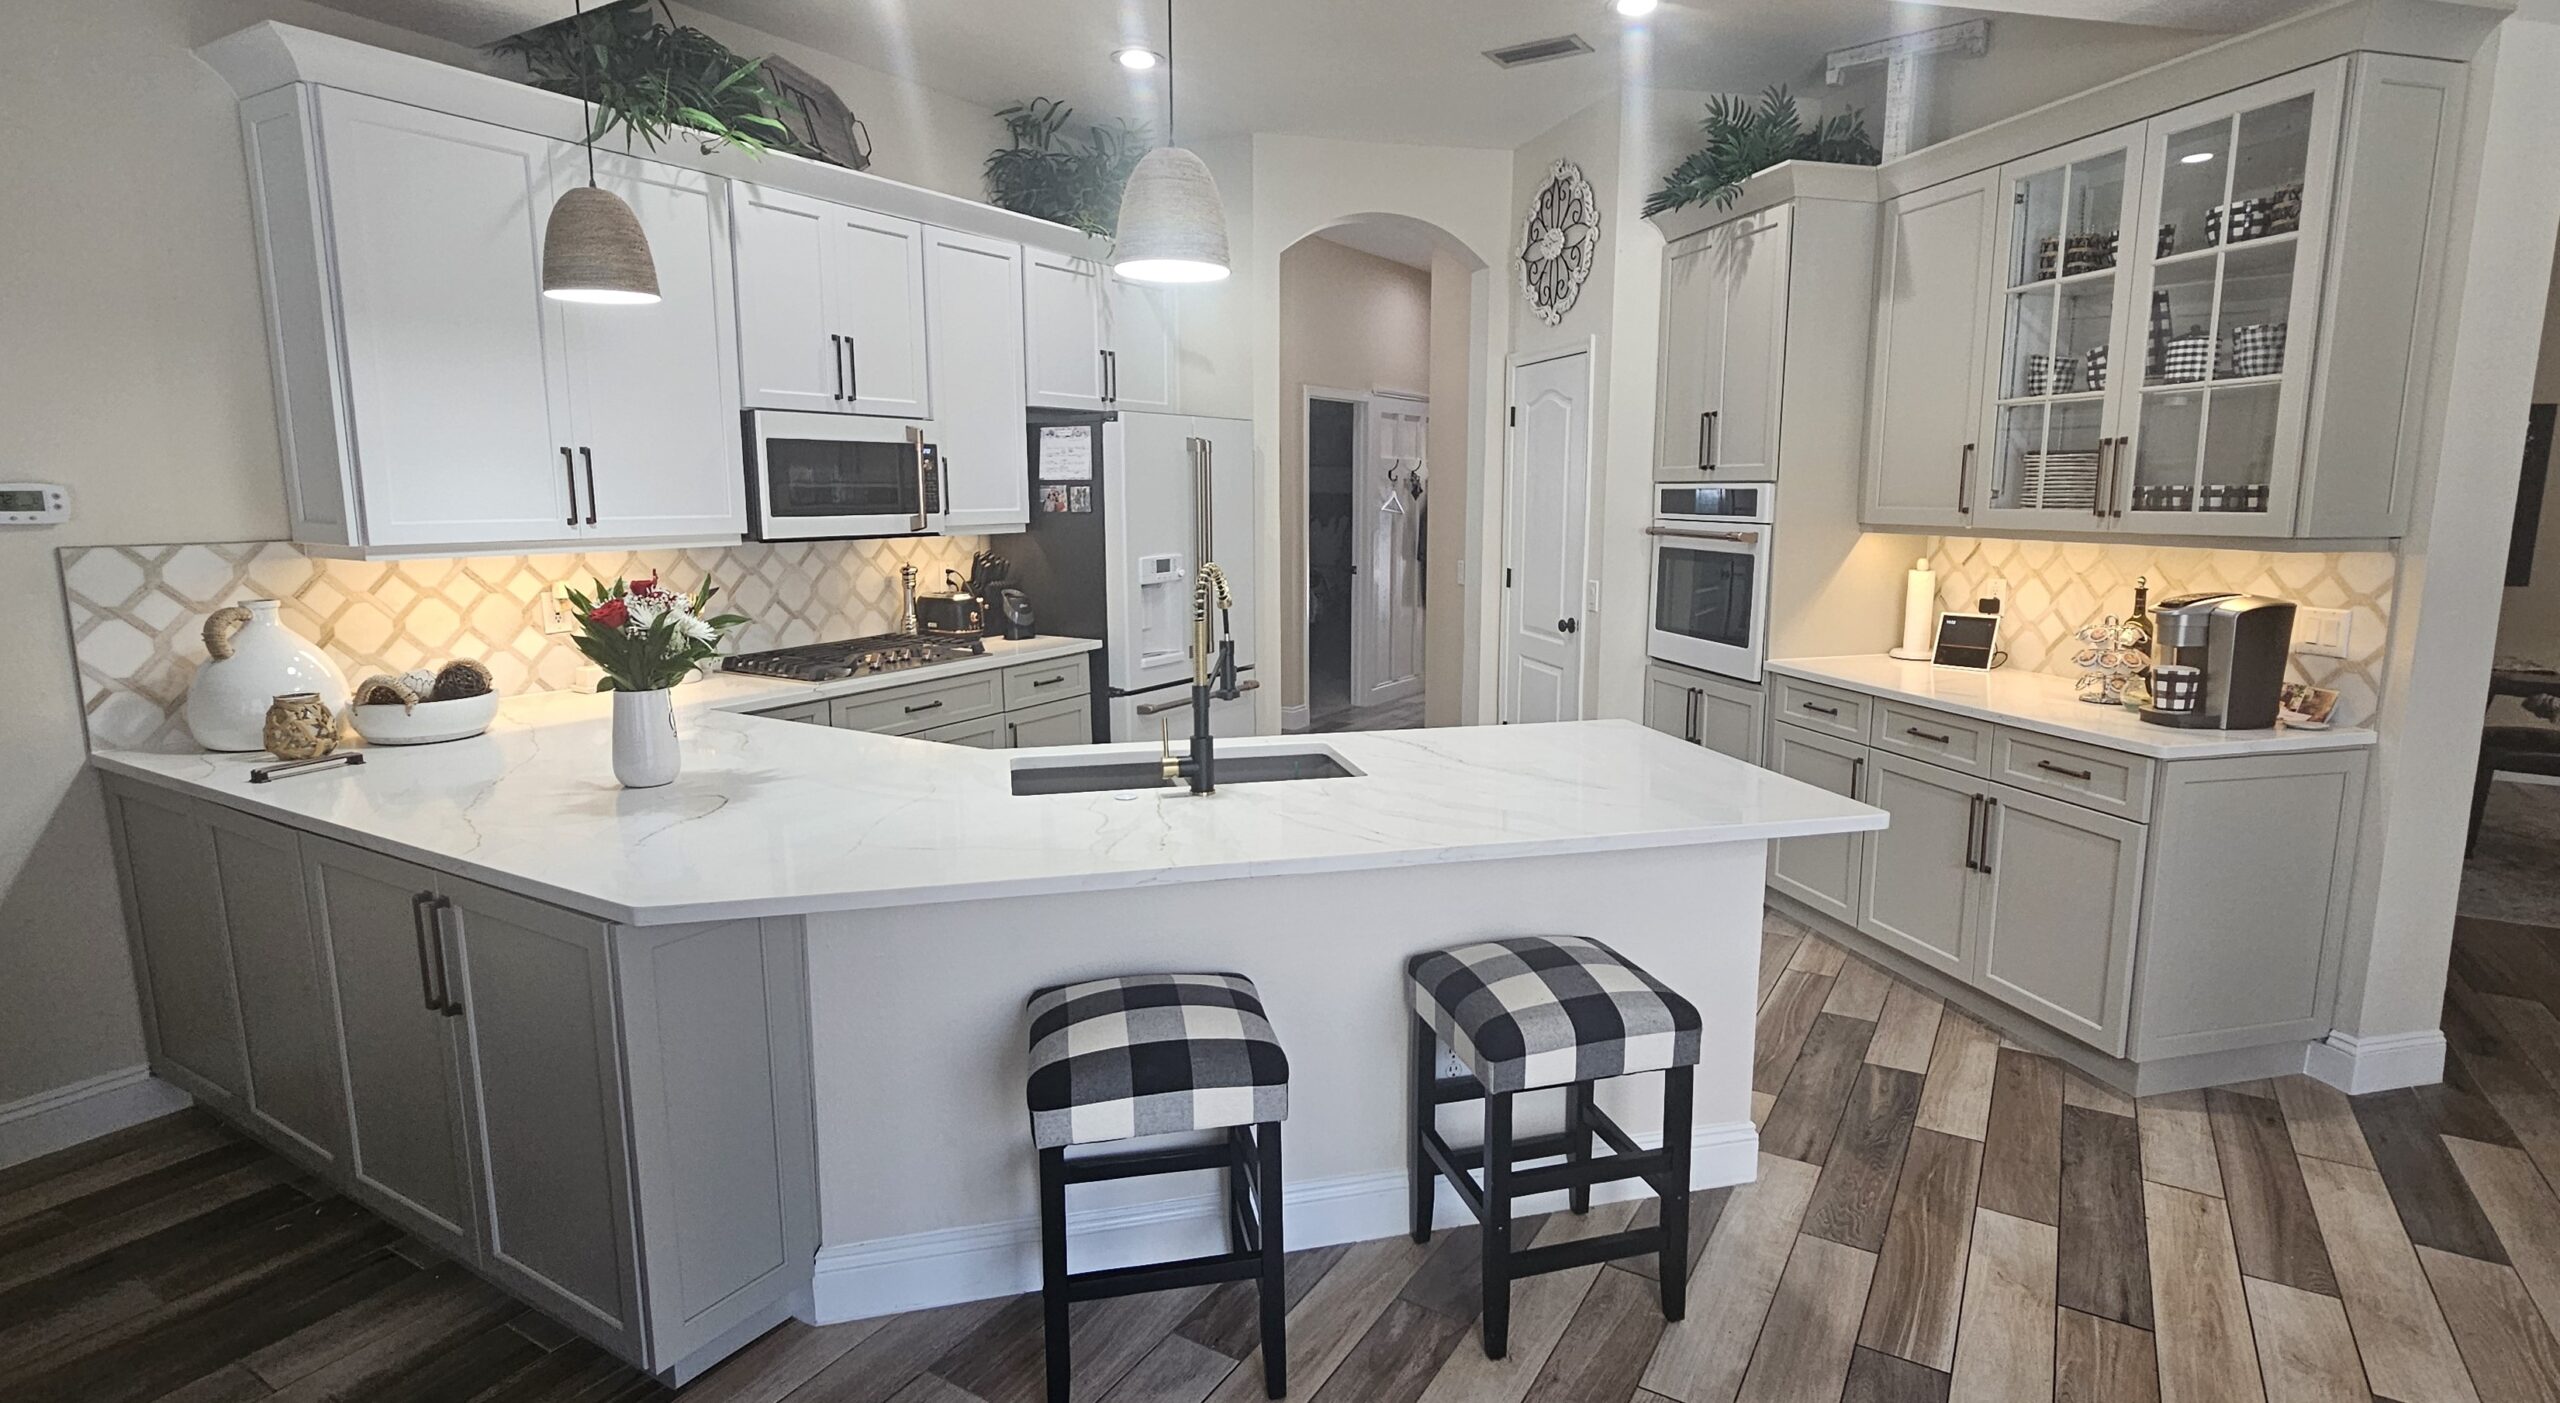 Modern appliances with a high-quality finish, granite worktops, and sleek white cabinet doors in Westchase 